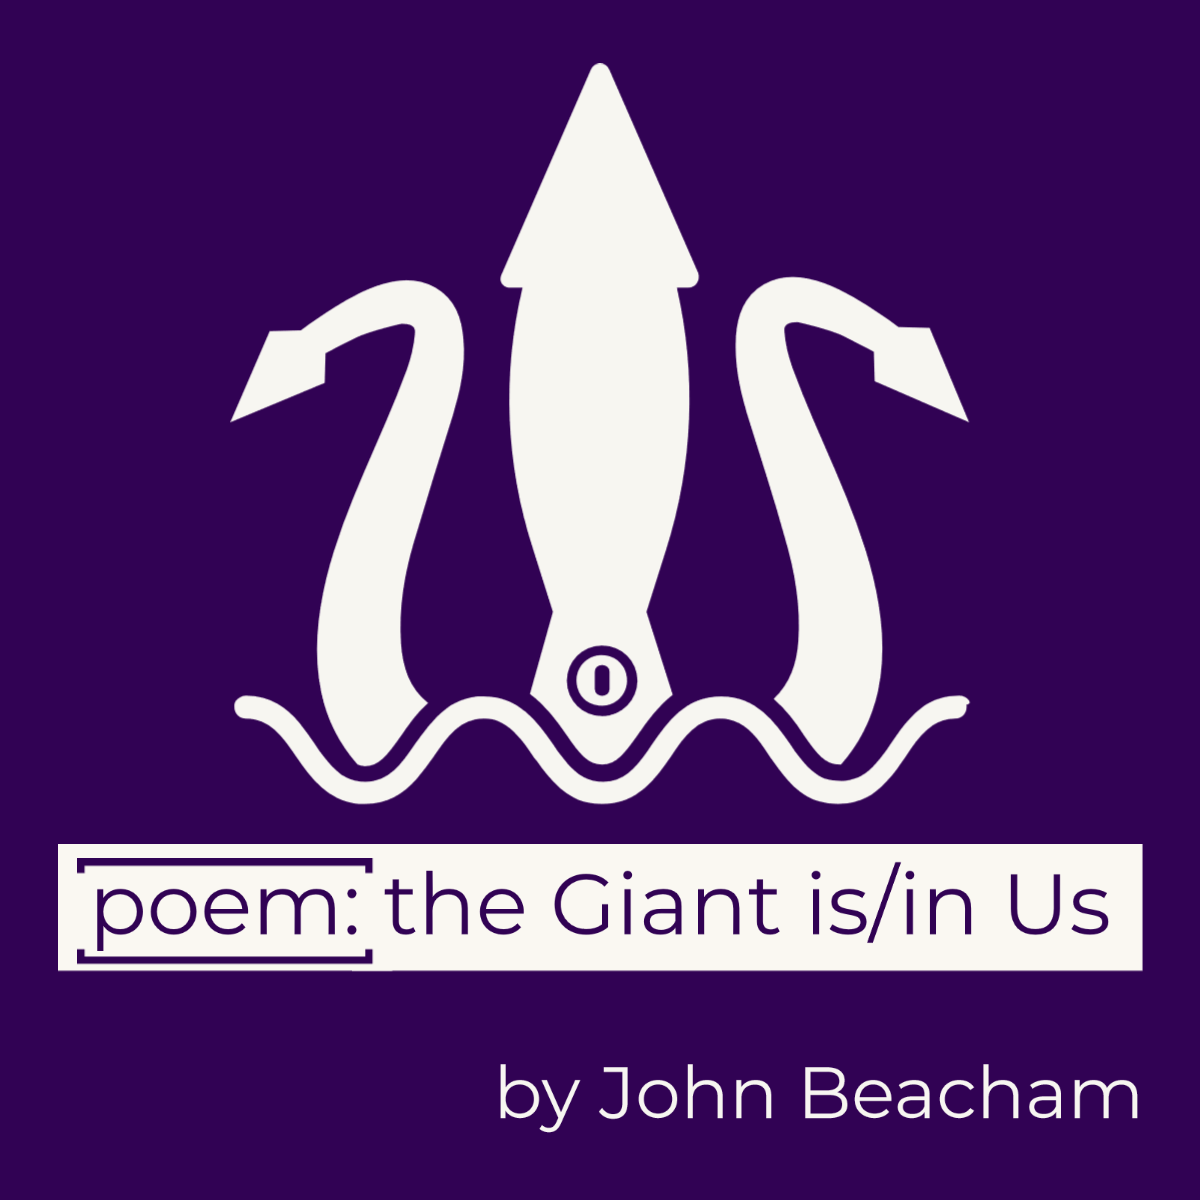 Poem: the Giant is/in Us